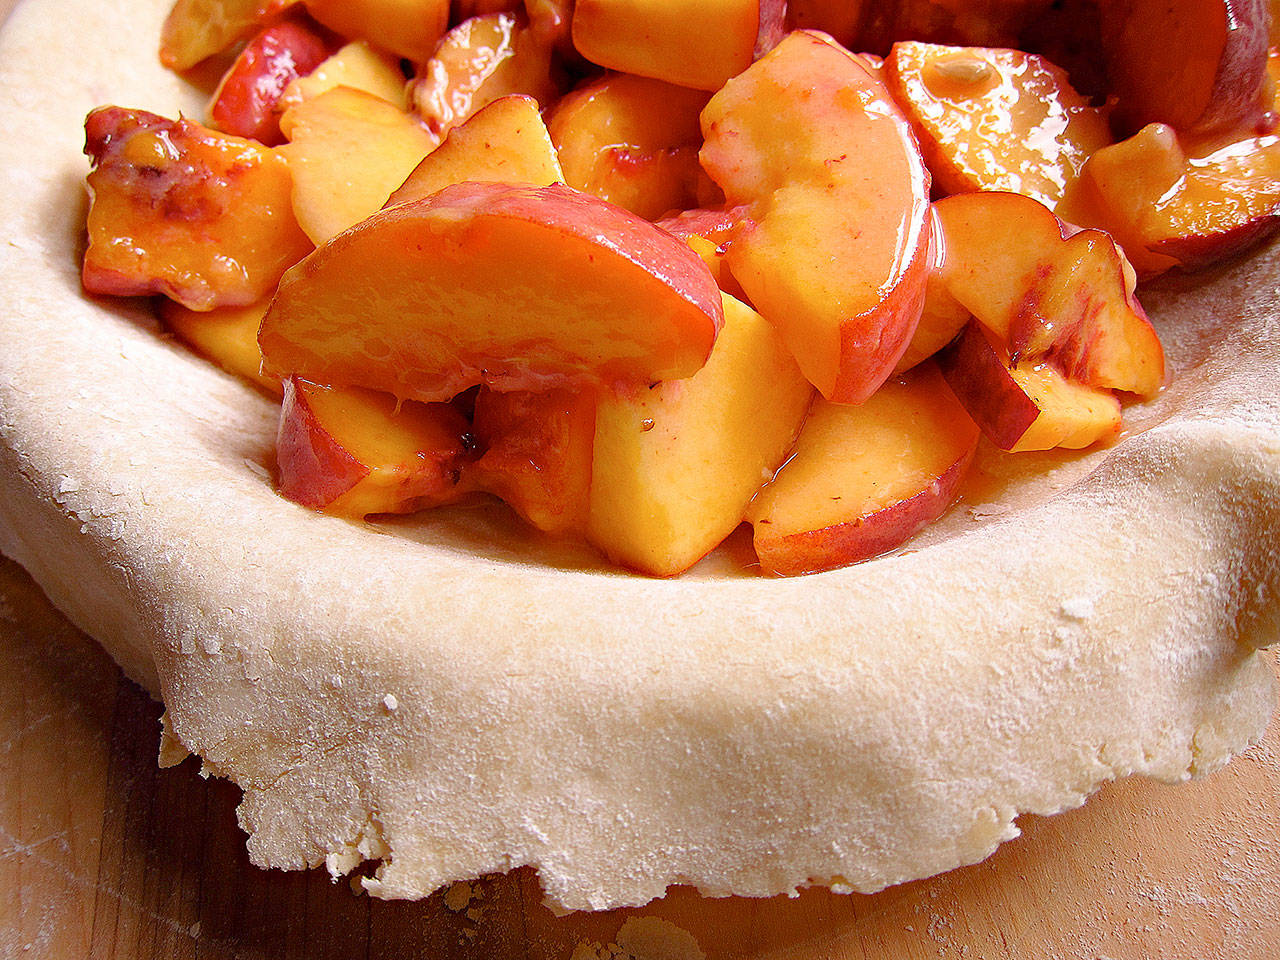 This peach pie holds court in a pie plate like no other. (Tom Conway Photos)